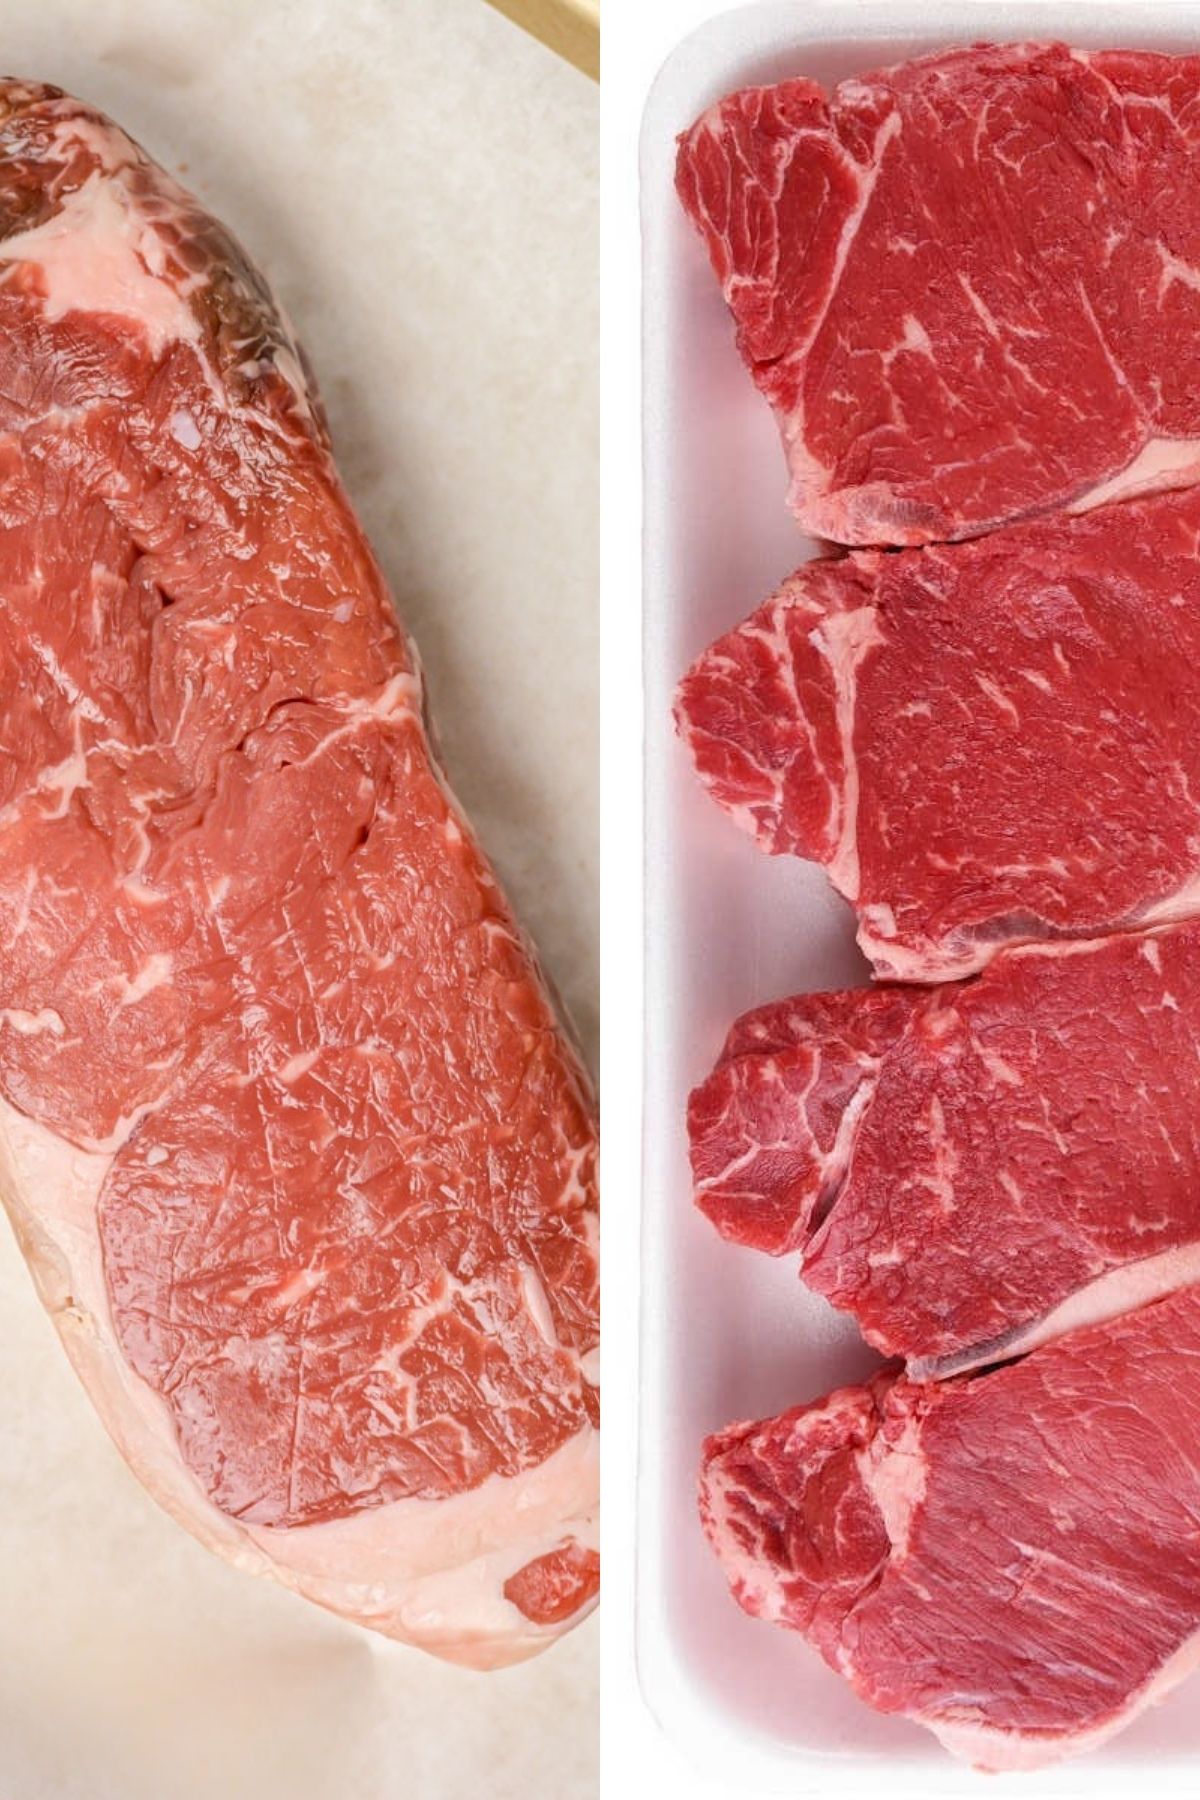 Two photos of raw New York Strip and sirloin steaks.